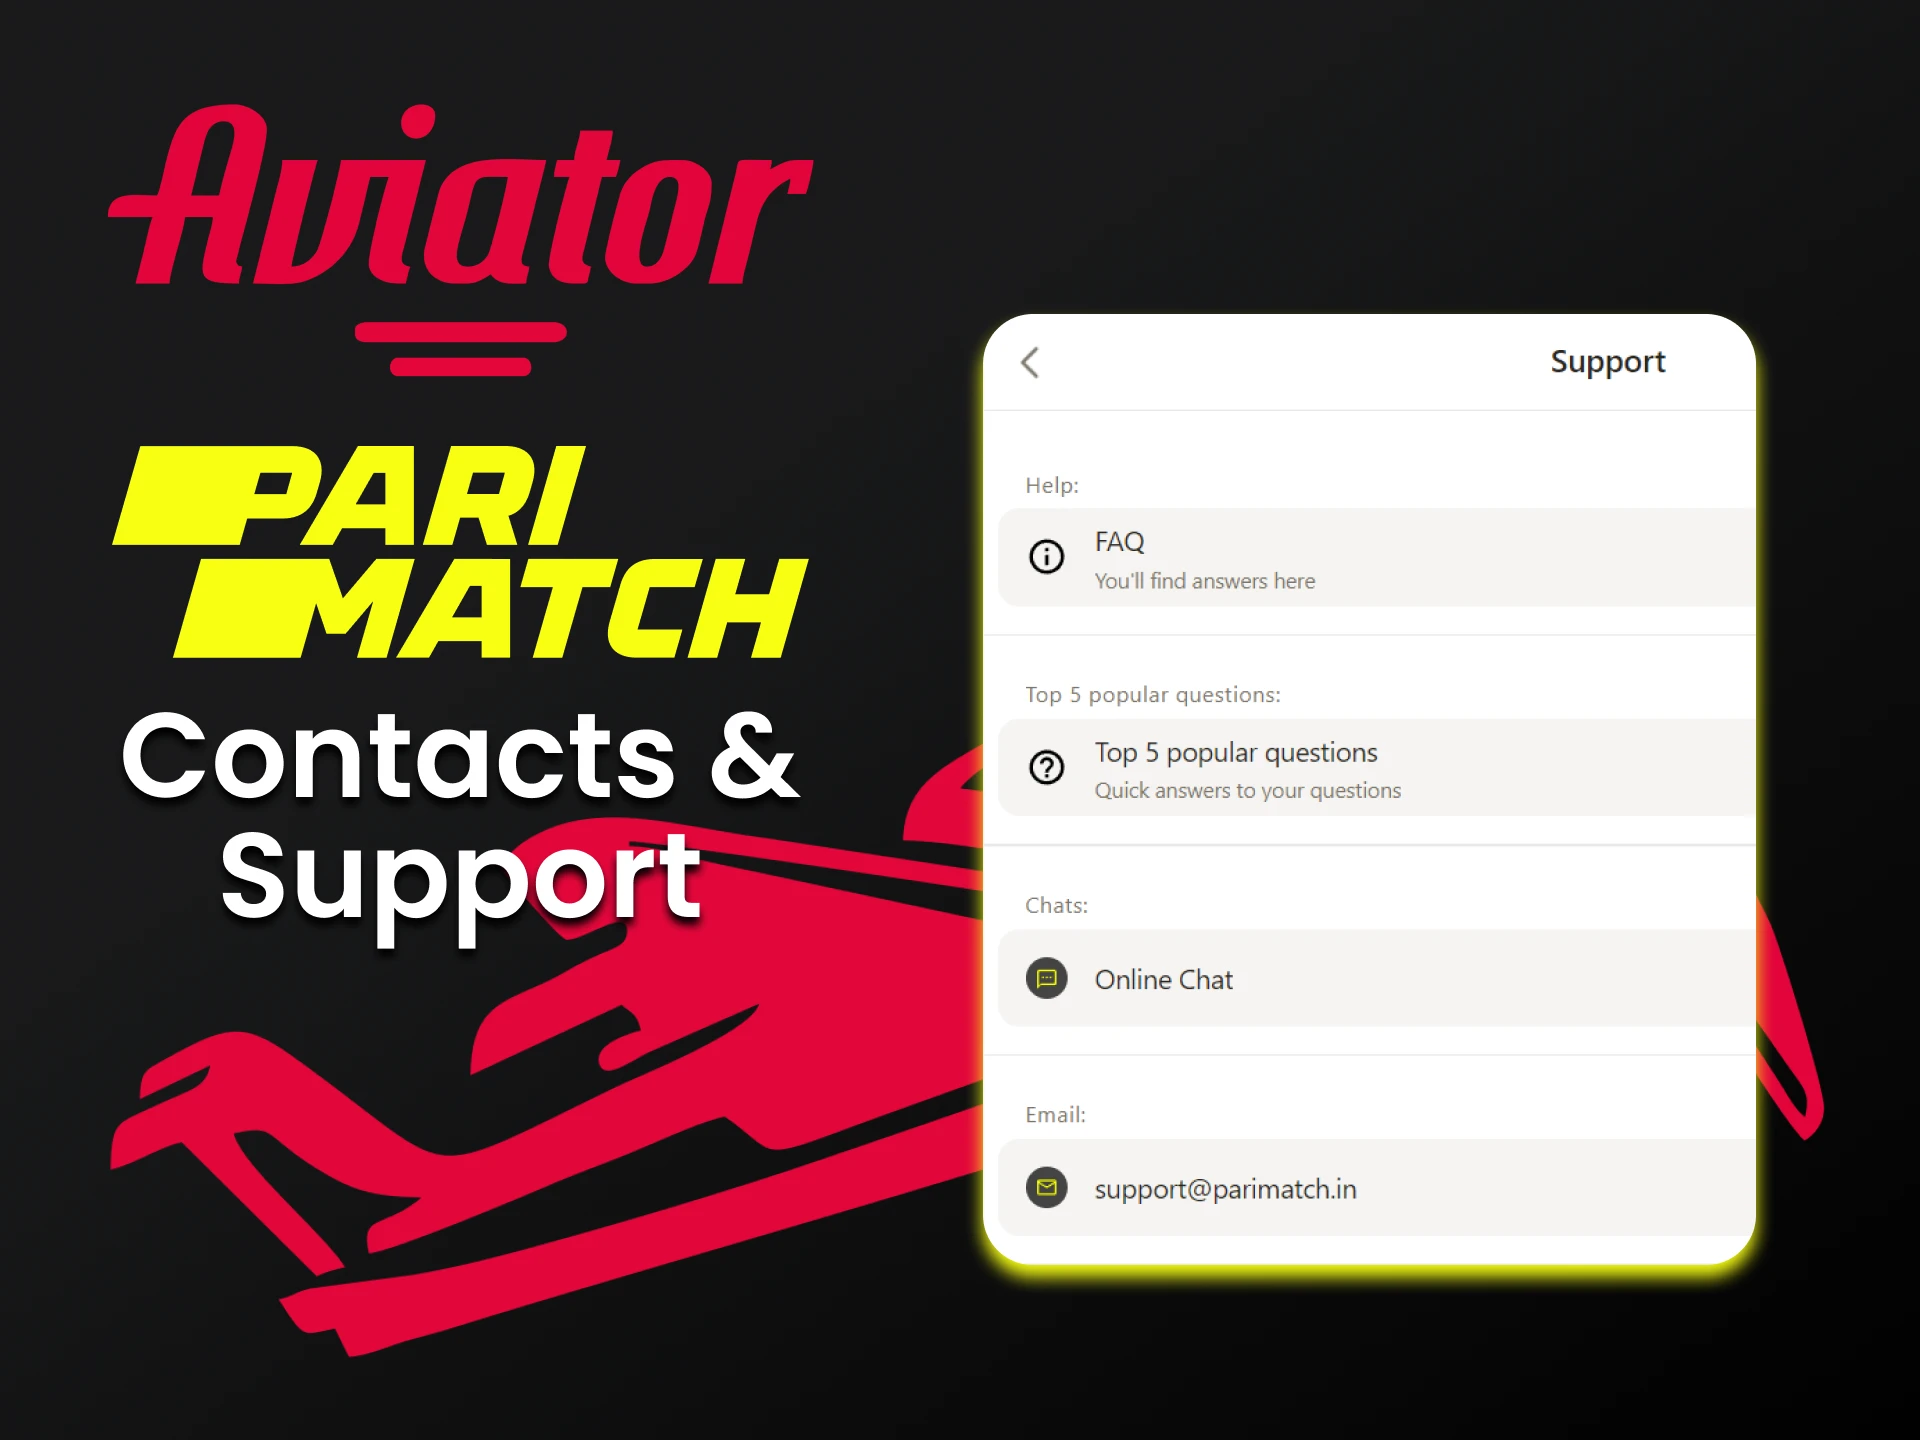 If you have any problems with the game Aviator, you can always report it to the Parimatch team.